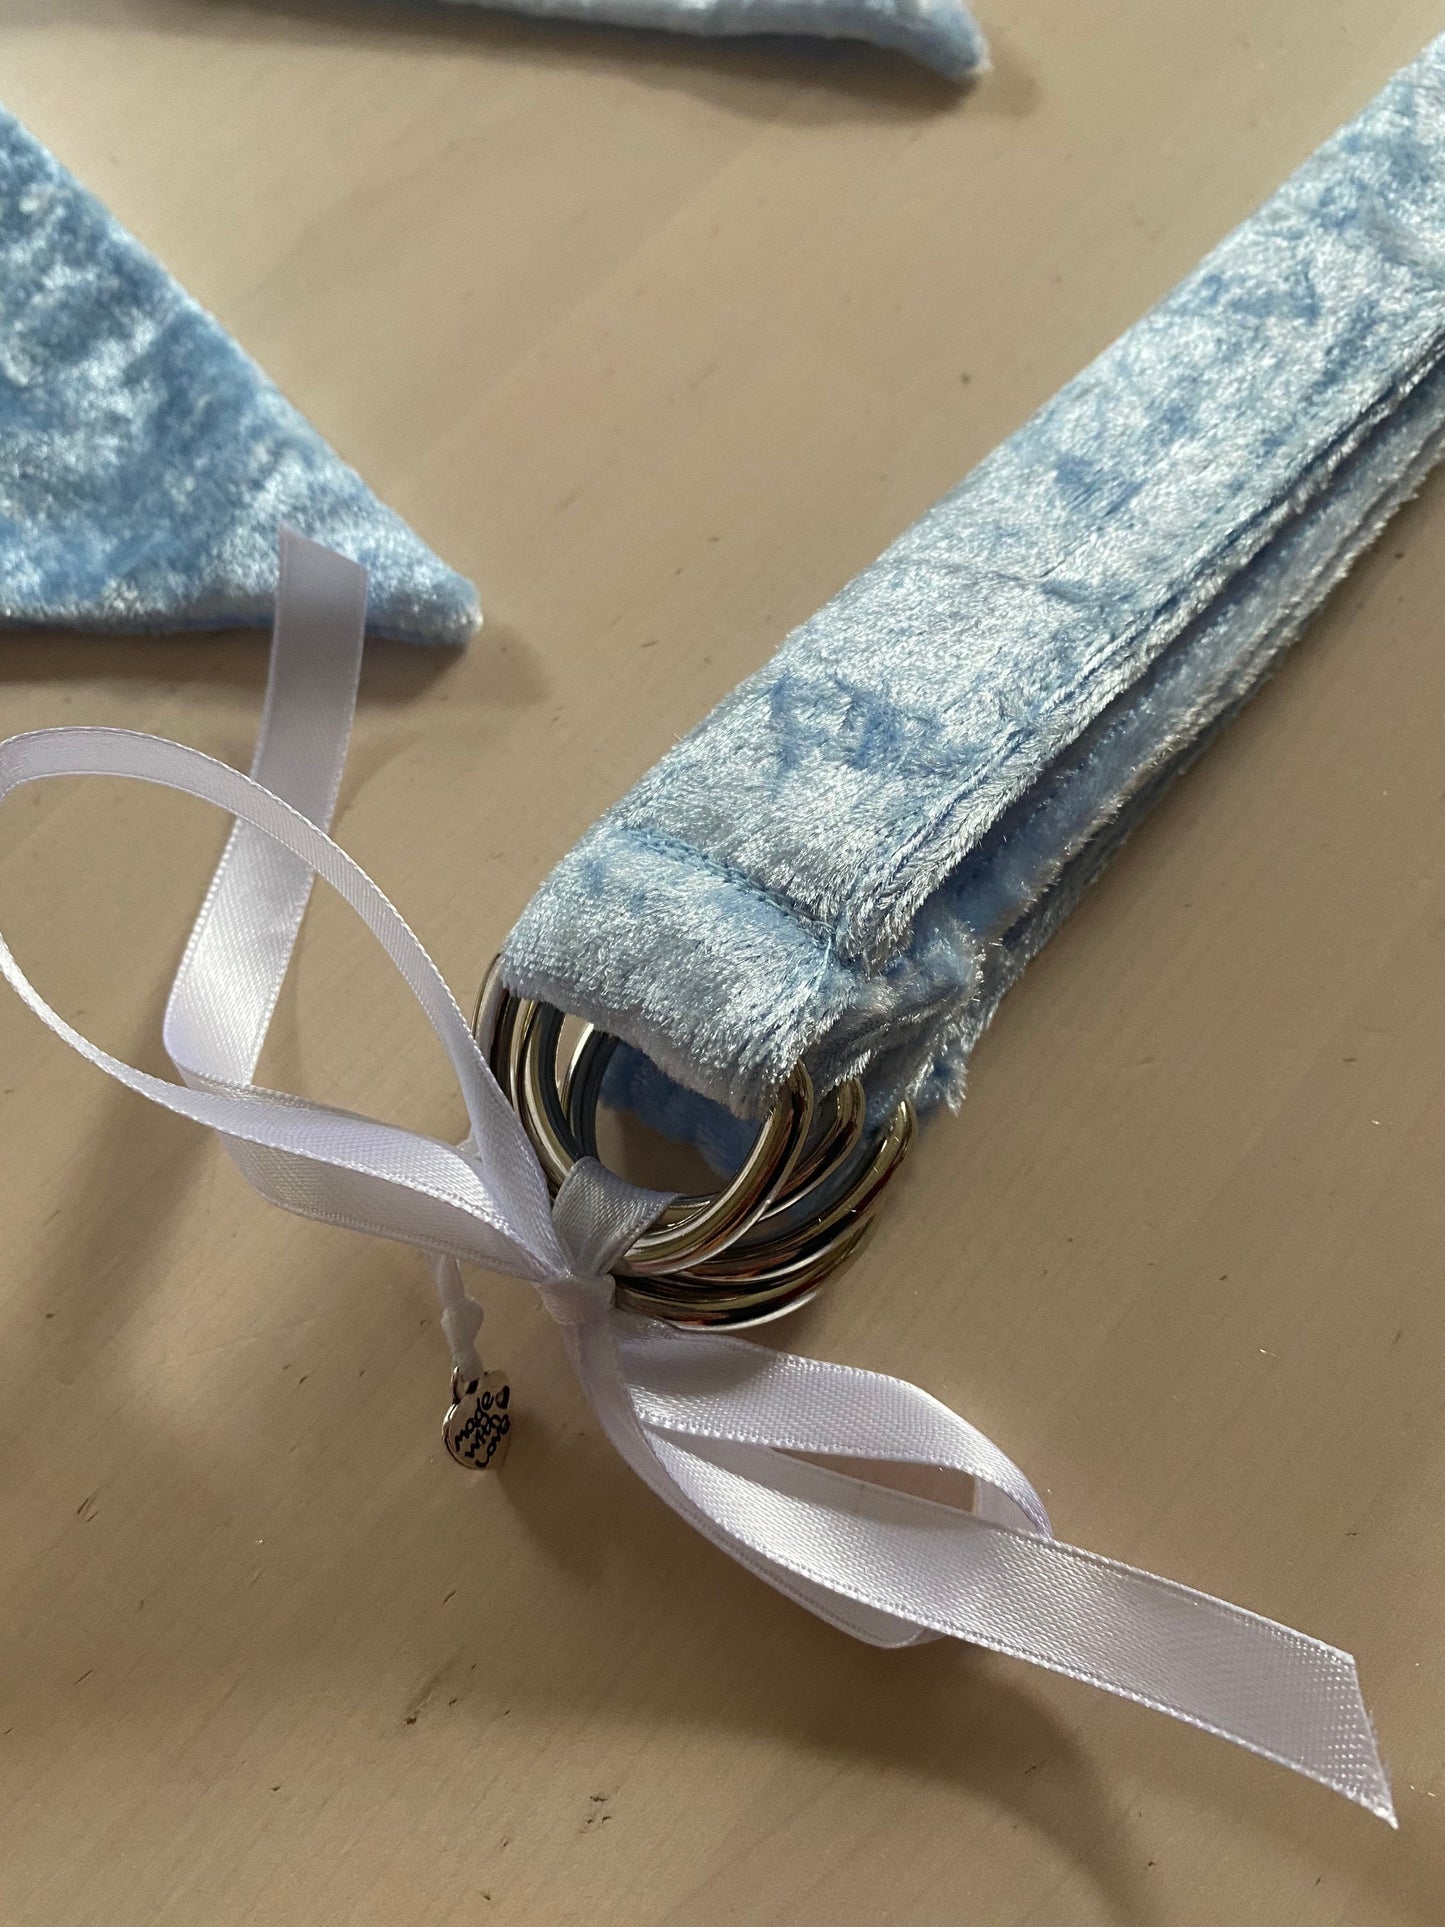 Bow Curtain Tie Back Set